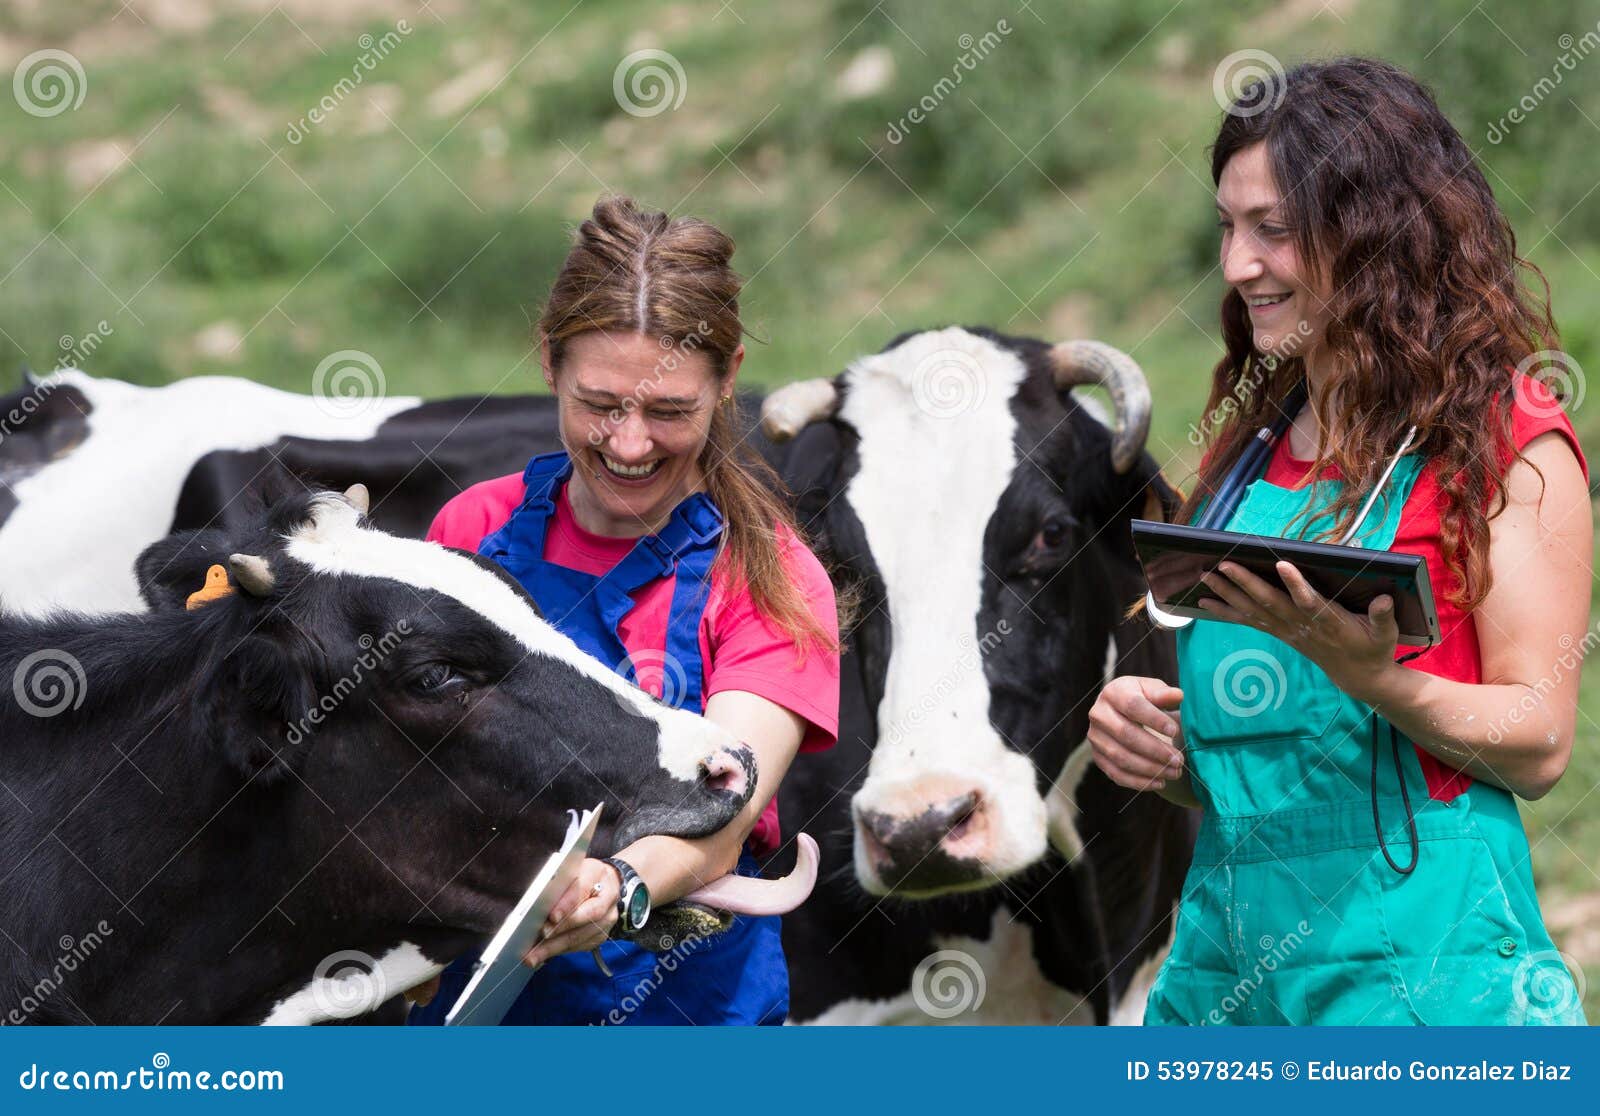 https://thumbs.dreamstime.com/z/veterinary-farm-performing-physical-examination-cow-53978245.jpg